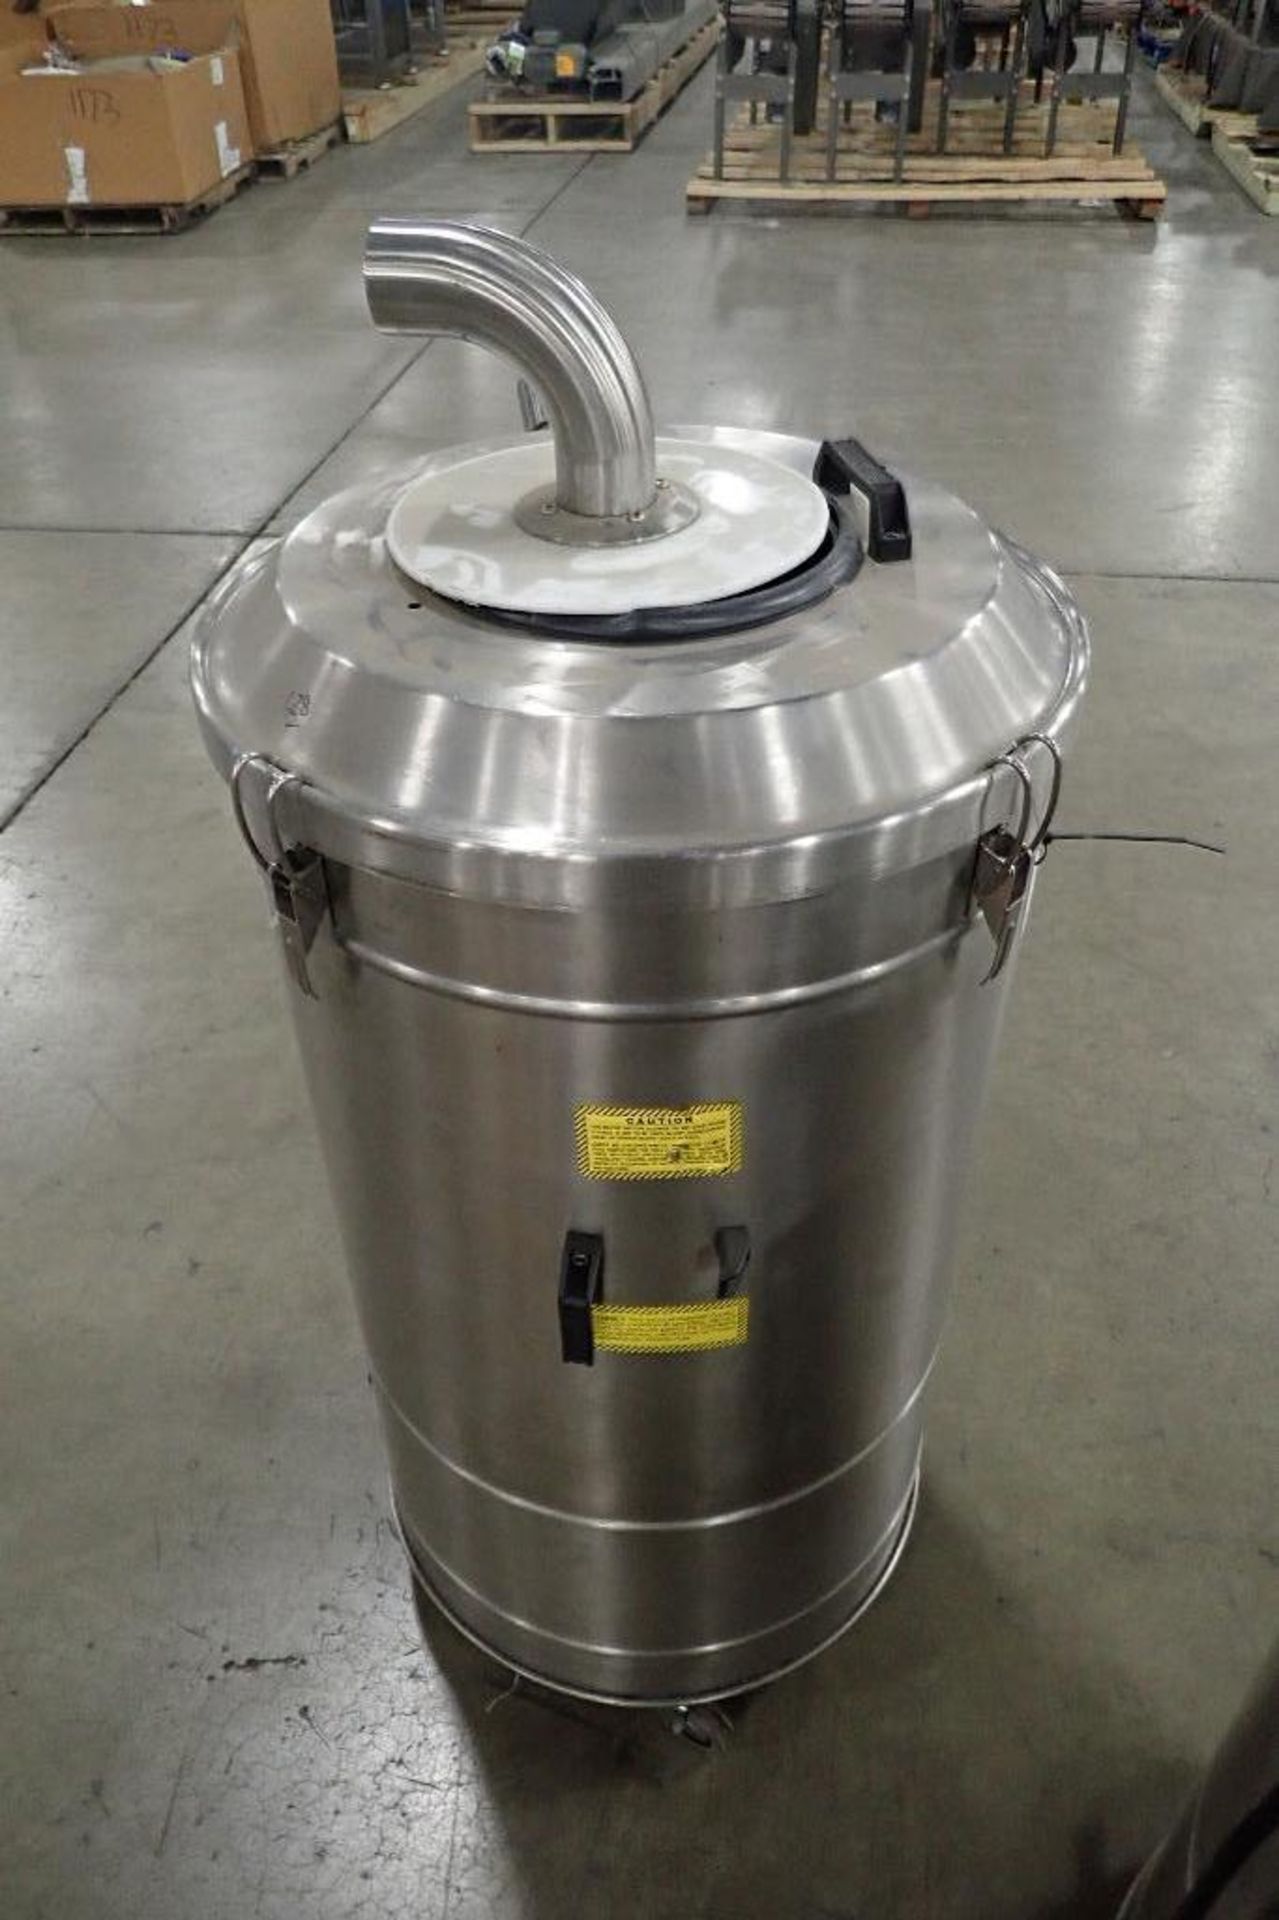 Nilfisk commercial vacuum, Type R305X, SN 04AK425. **Rigging Fee: $25** (Located in 3703 - Eagan, MN - Image 2 of 3